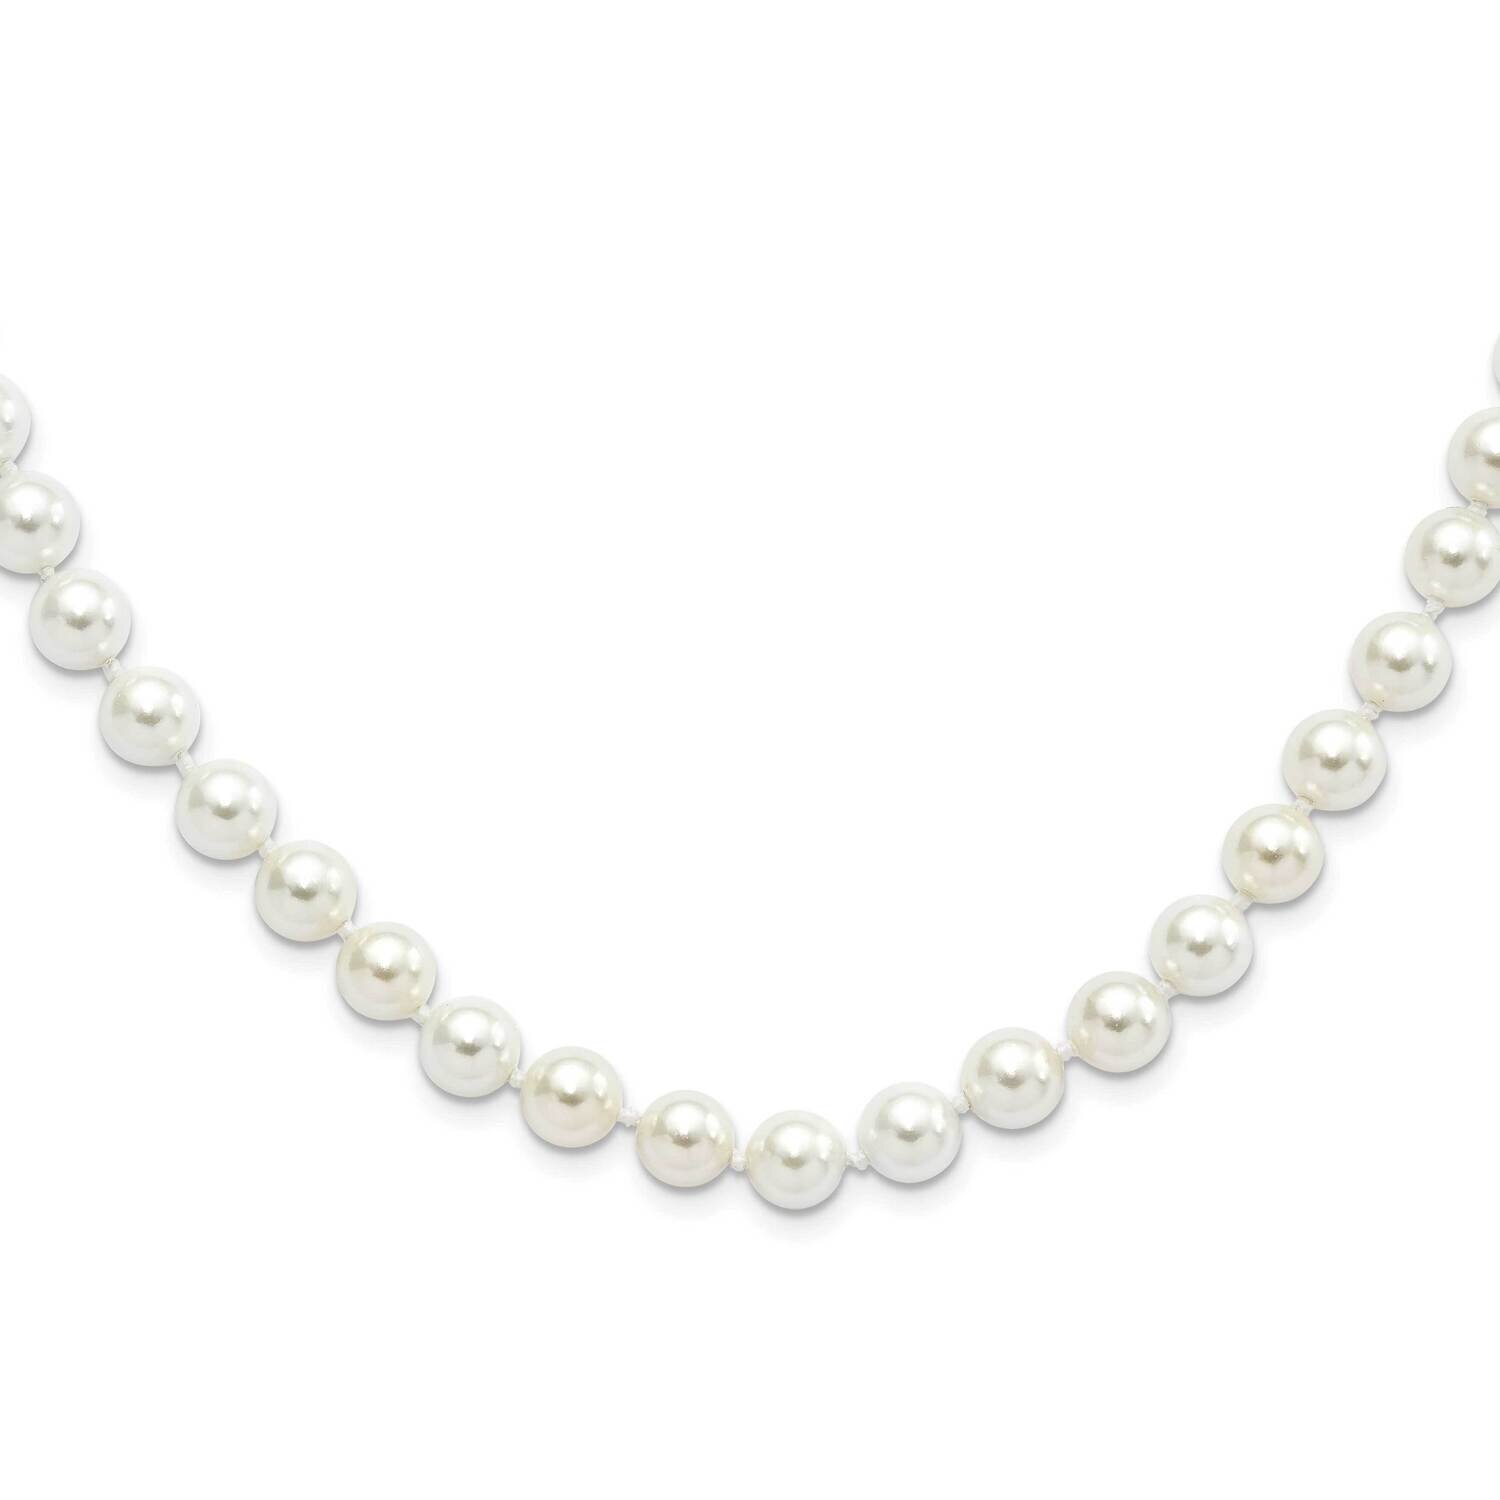 Majestik 8-9mm White Imitation Shell Pearl Necklace Sterling Silver Rhodium-plated QMJN8W-18